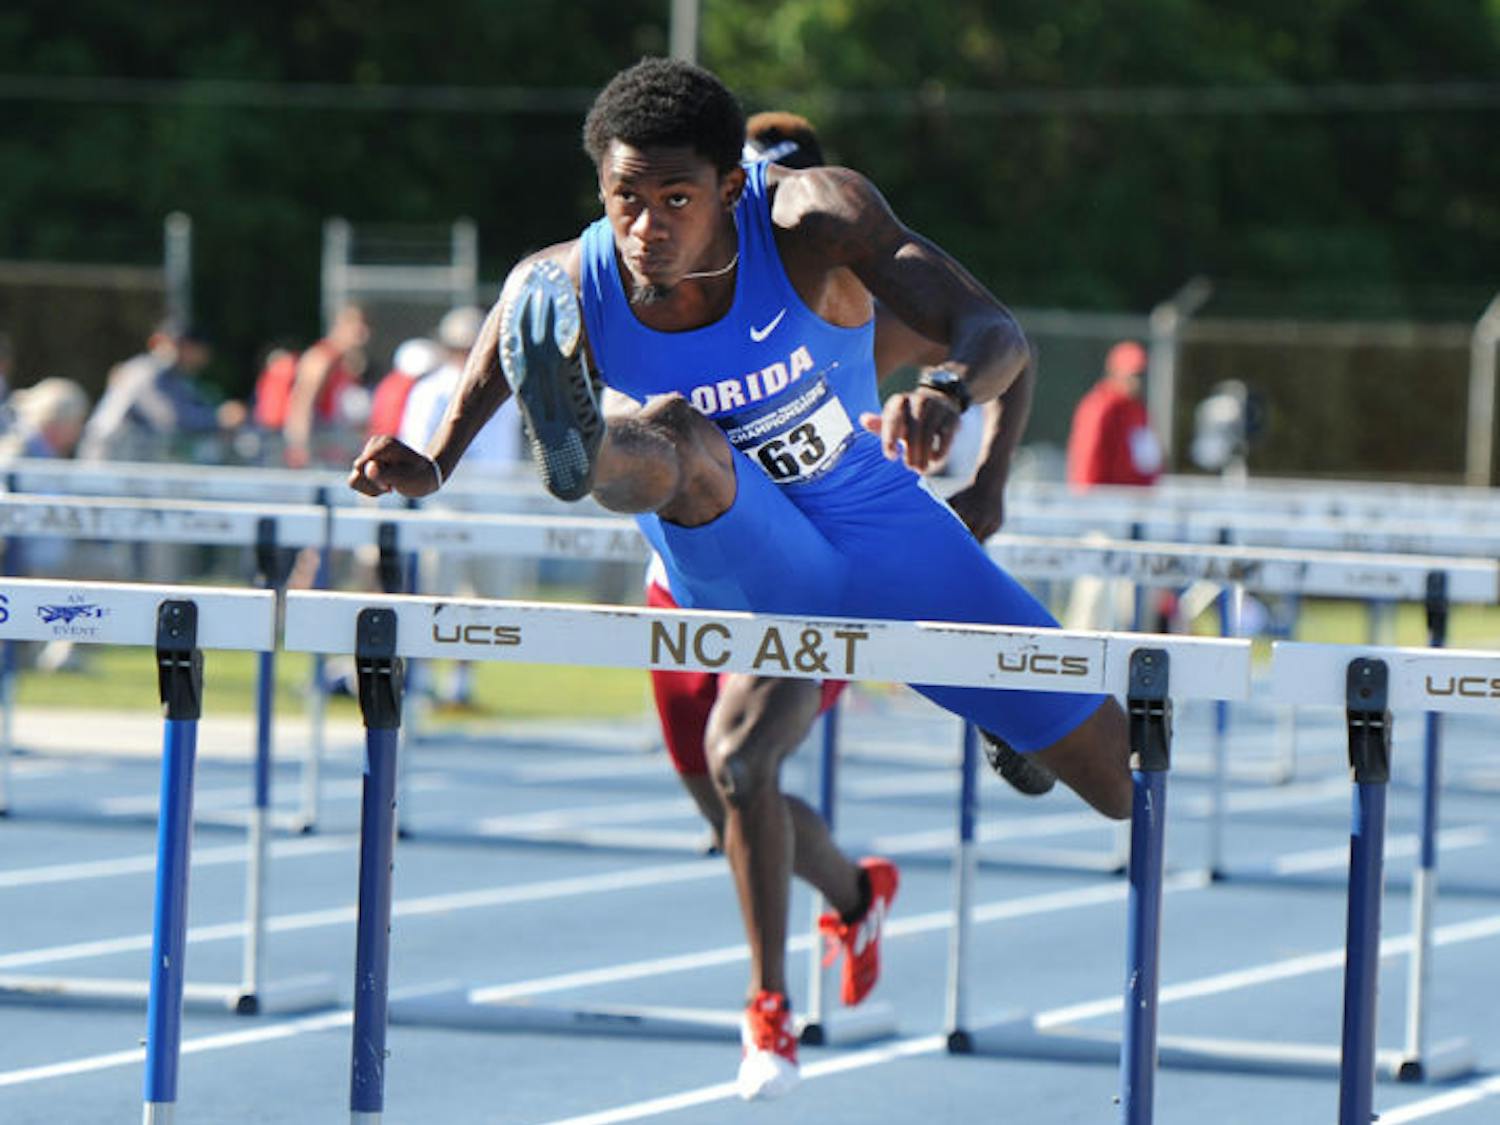 Eddie Lovett leaps over a hurdle during an NCAA East Preliminary Round in Greensboro, N.C., on May 24, 2013. Lovett played with former UF safety Matt Elam in high school.